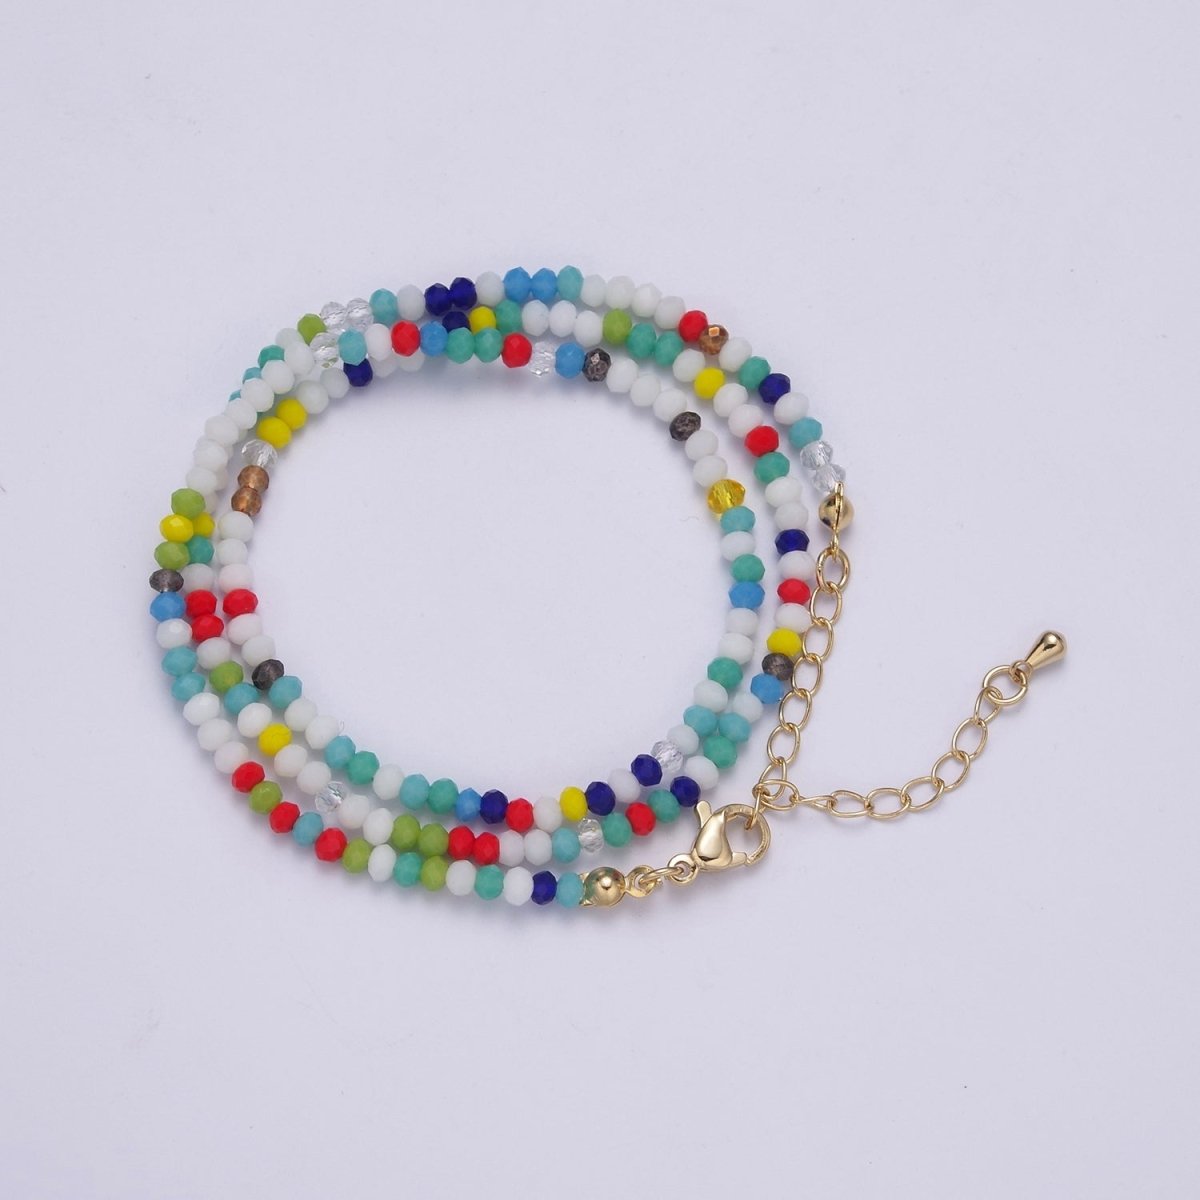 Rainbow Color Glass Seed Bead Necklace 17.5 inch + 2 inch Extender Chain Necklace Gift | WA-449 Clearance Pricing - DLUXCA